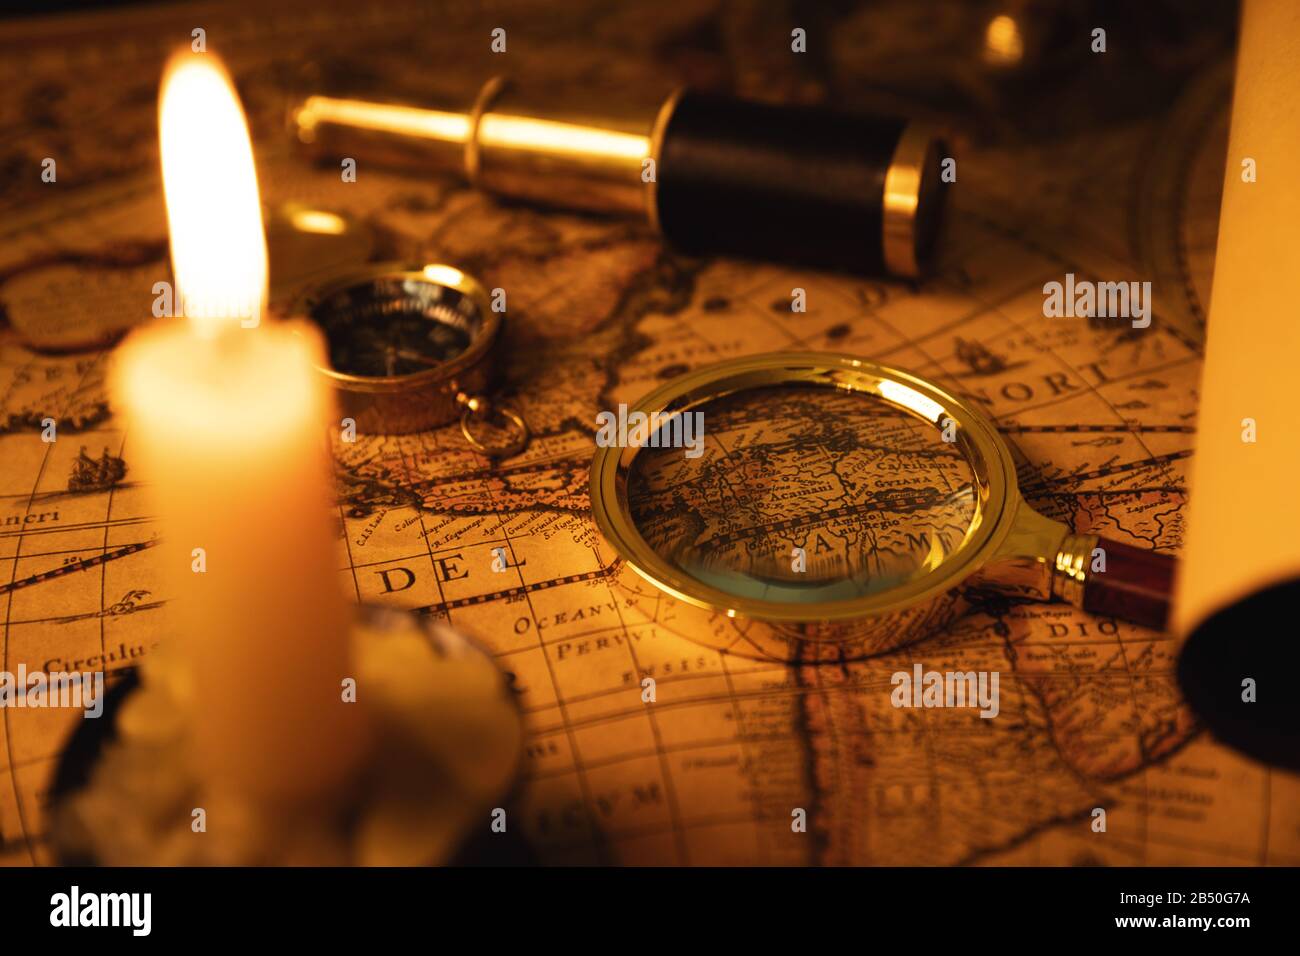 collection of antique objects on old world map in candlelight Stock Photo